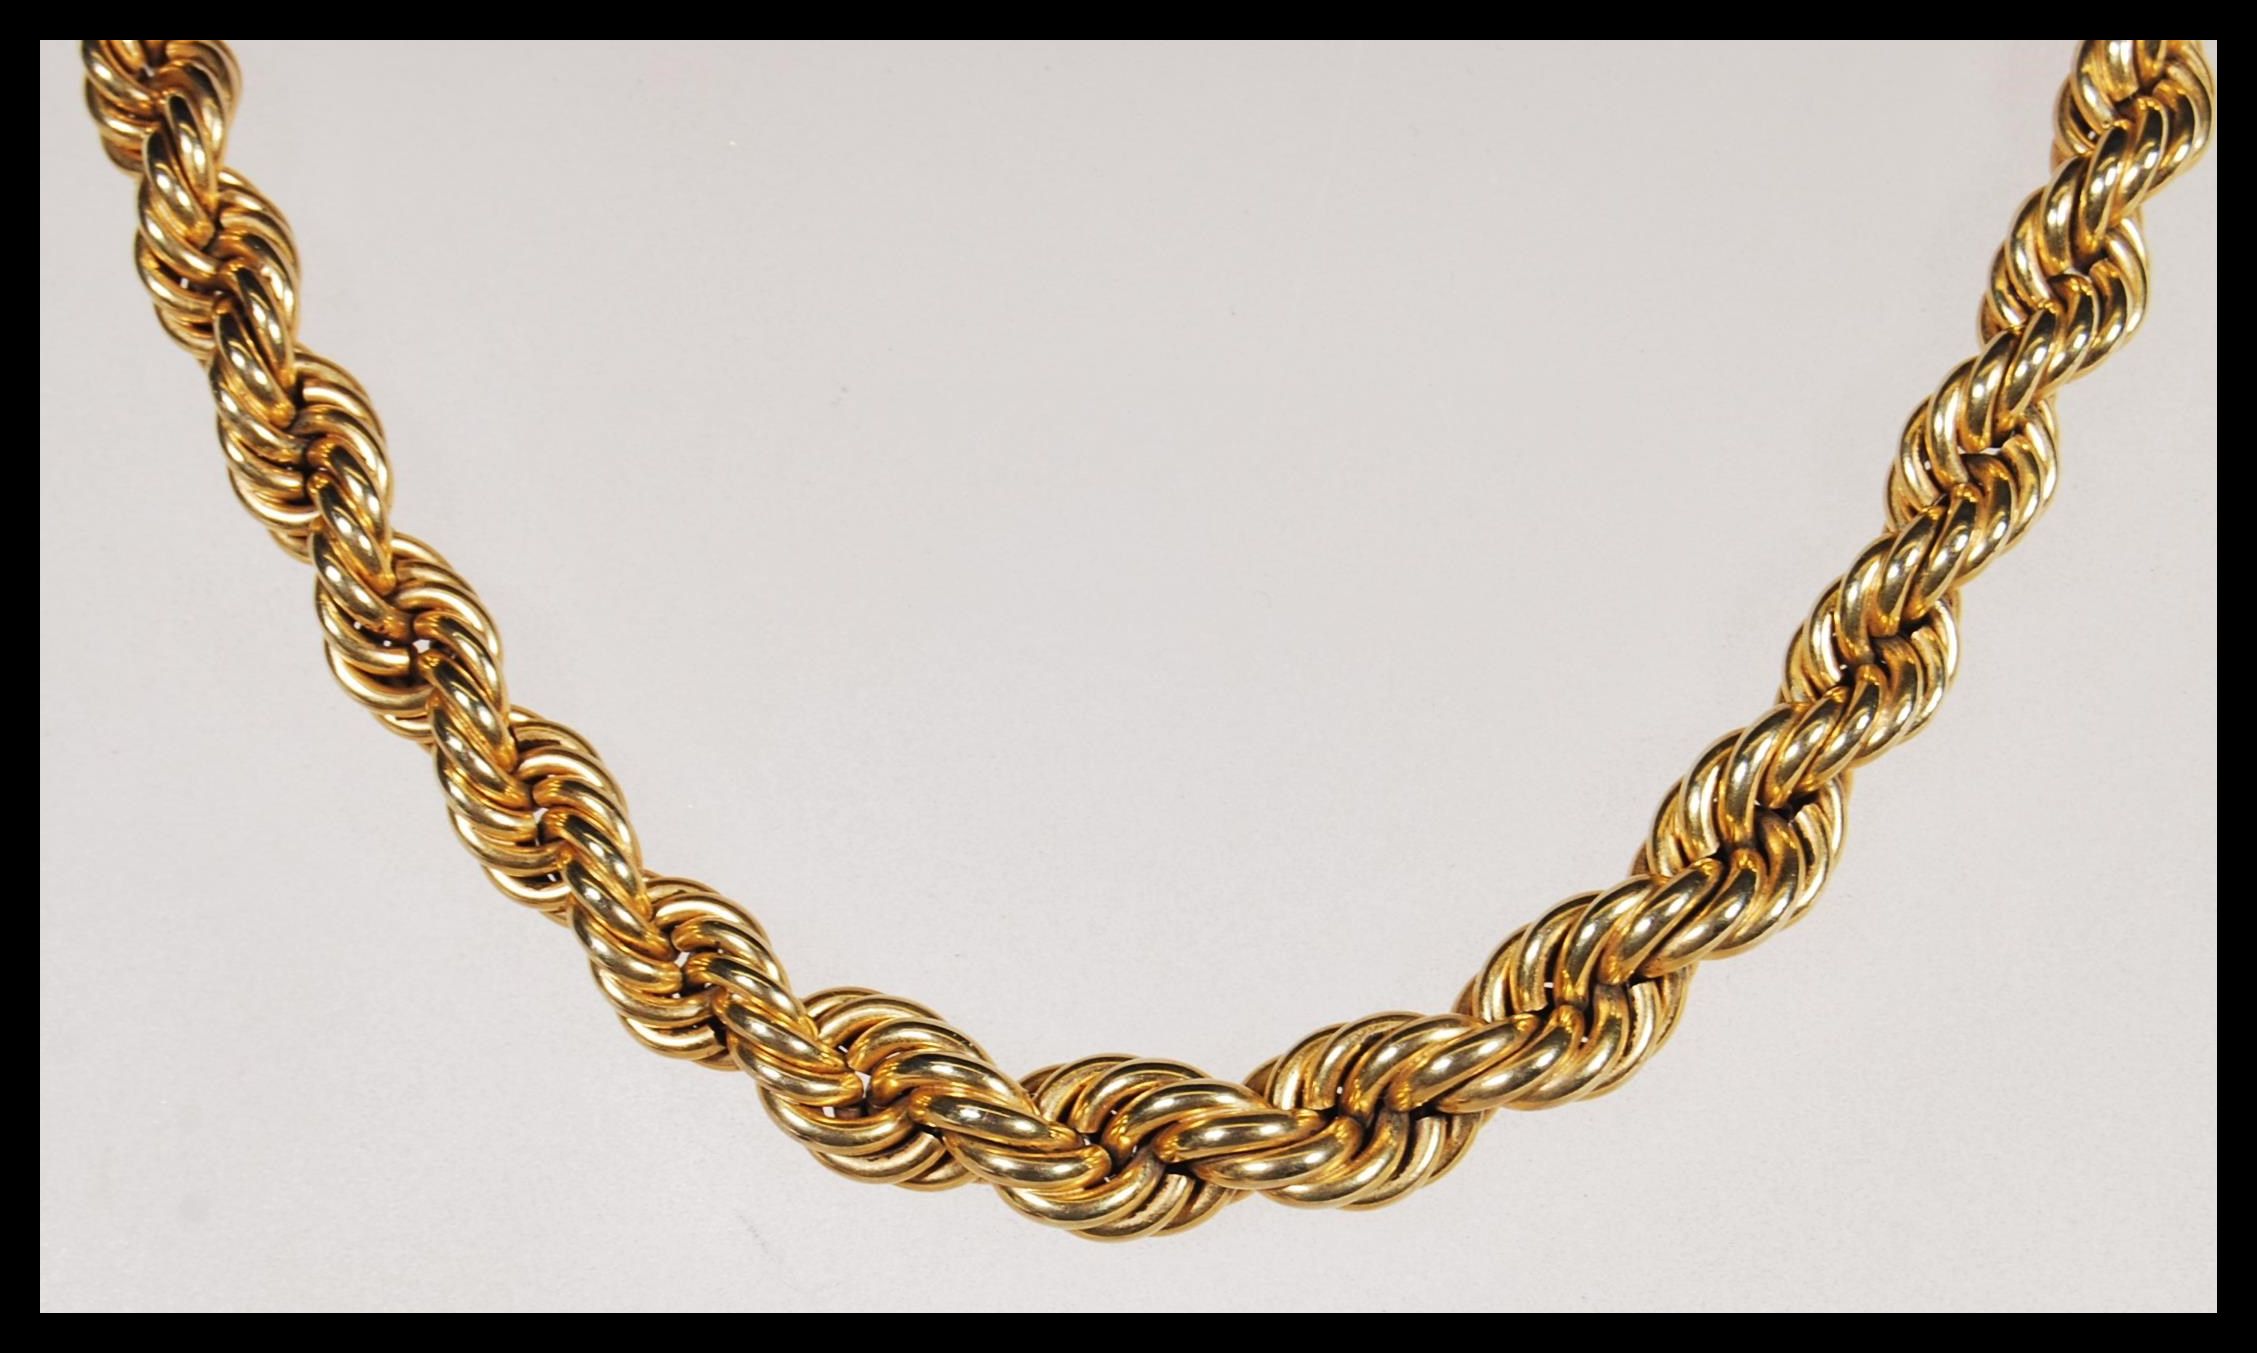 A hallmarked 9ct gold rope twist necklace chain of graduating form having bolt ring clasp.